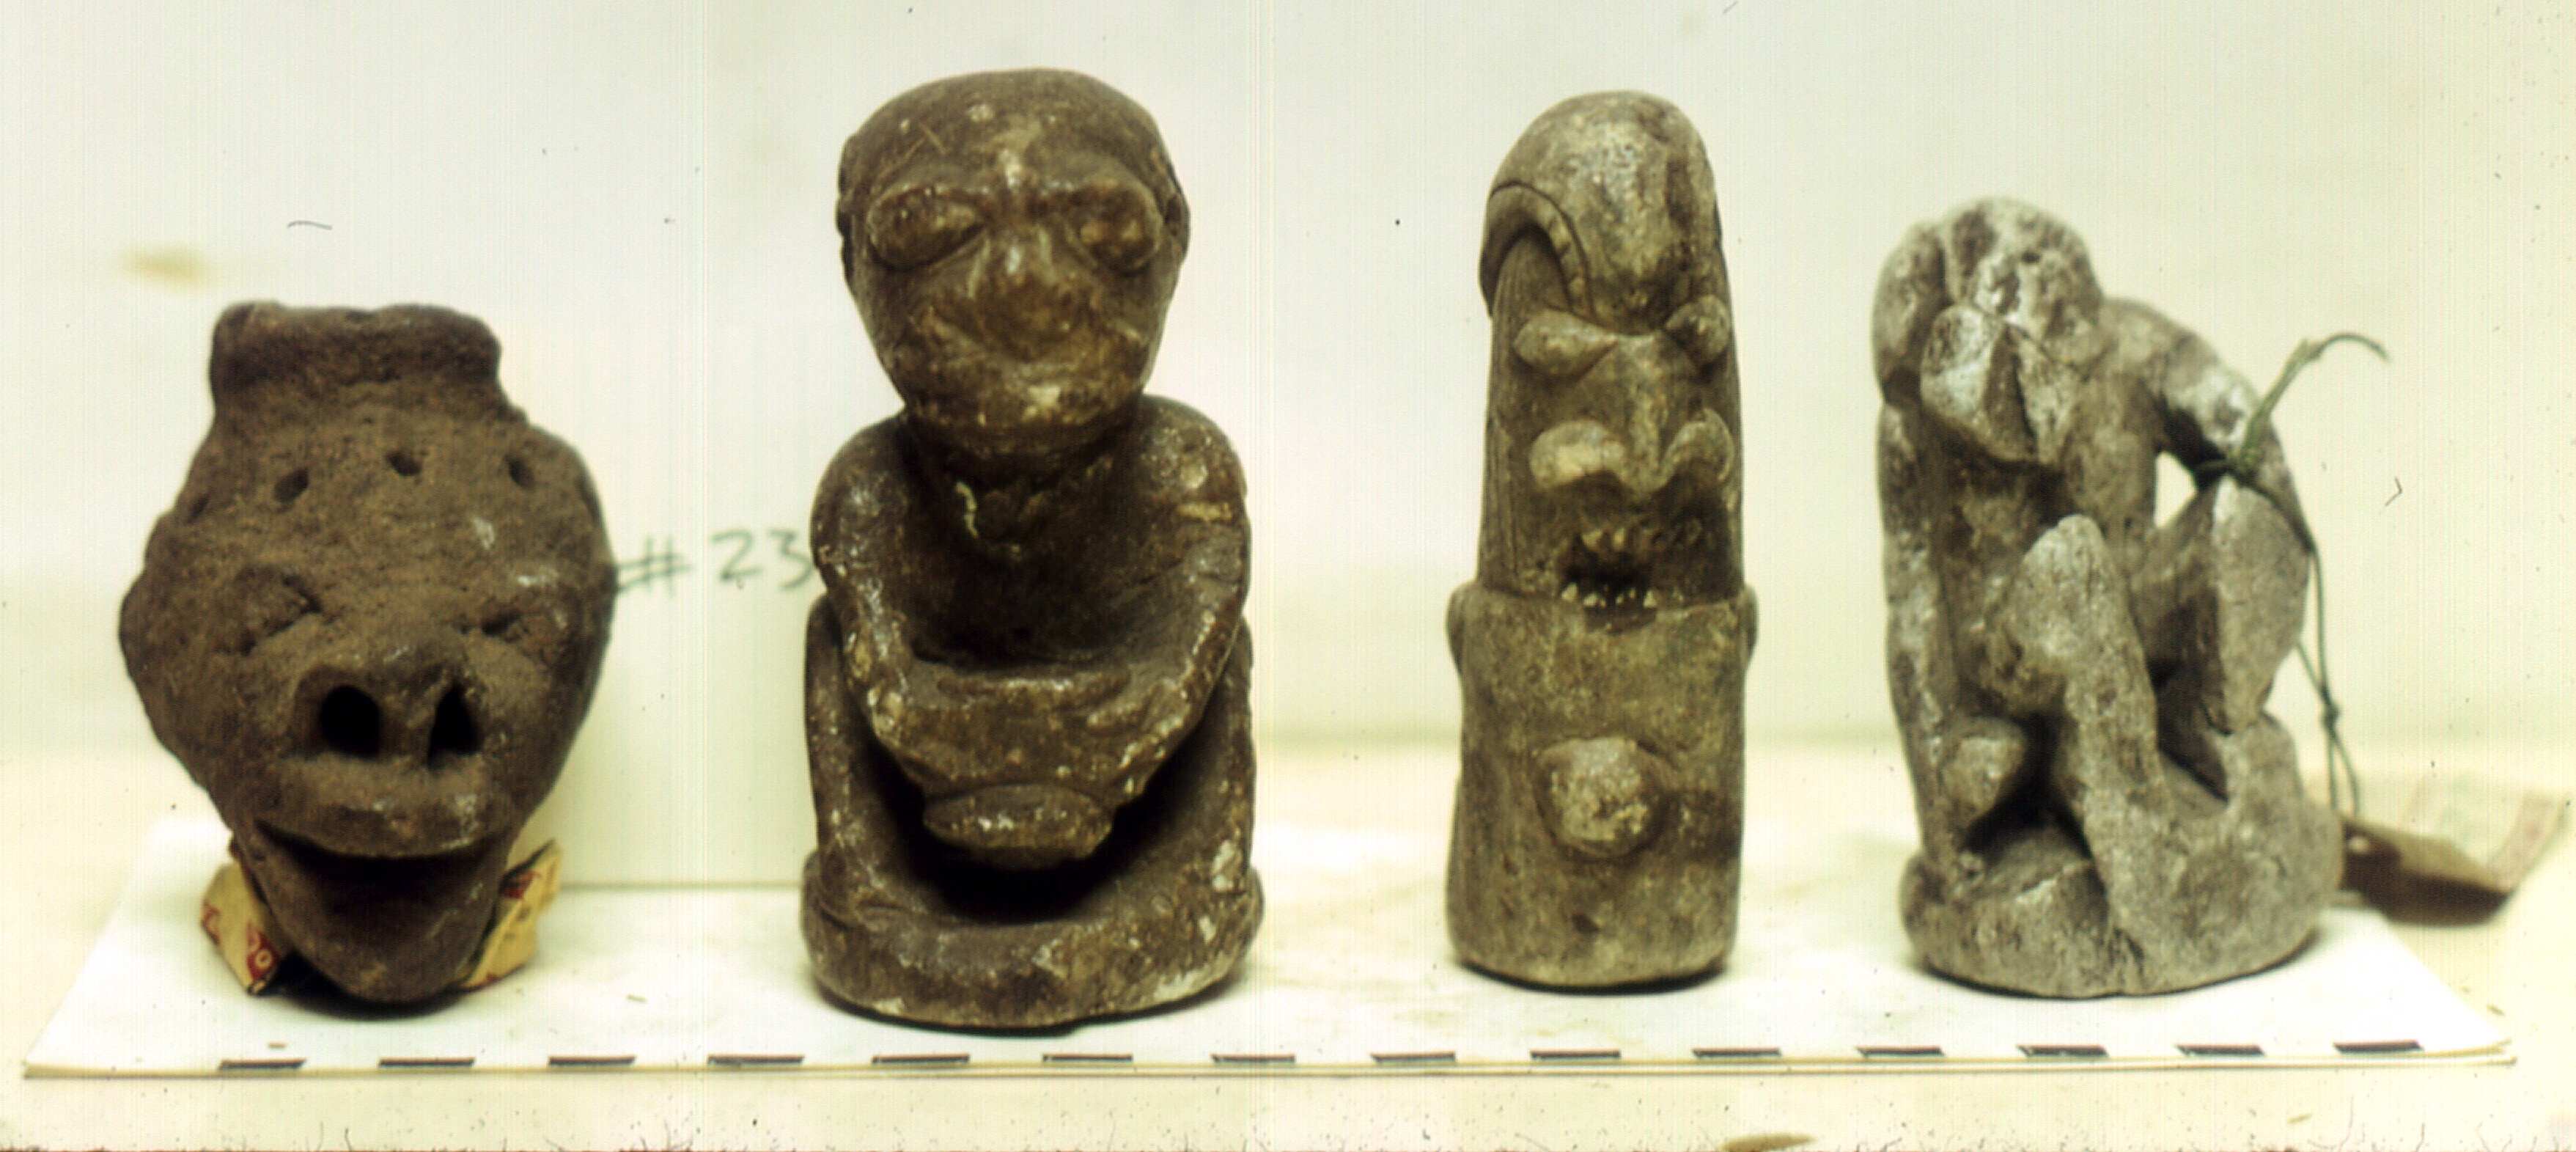 The unknown origins of the mysterious Nomoli figurines 4